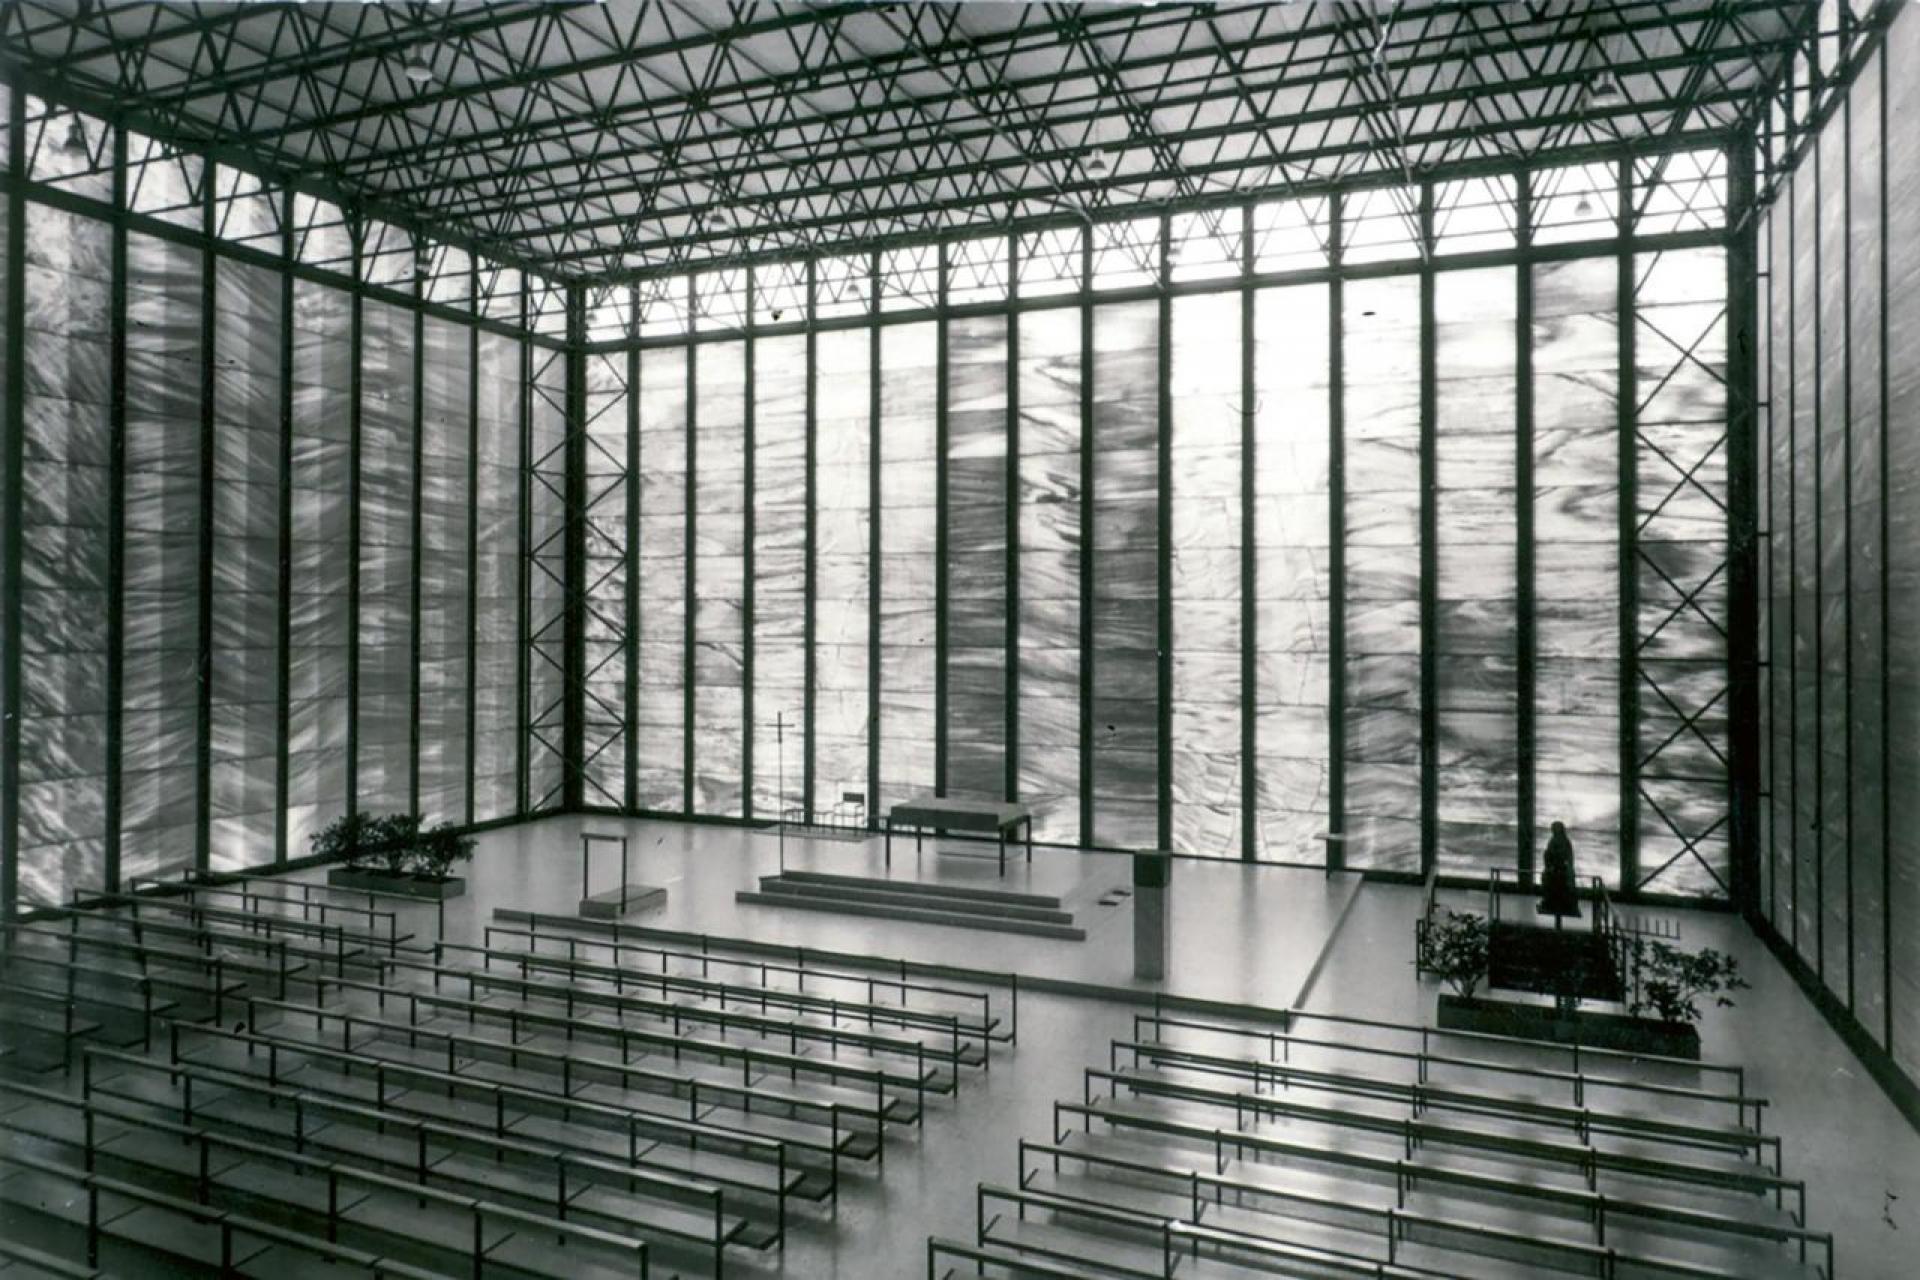 The 28mm thick Pantelikom marble from Athens filters the daylight and illuminates the space evenly. | Photo © Archives de la construction moderne (ACM), EPF Lausanne, from: Kunst + Architektur in der Schweiz, 2005, p. 57.